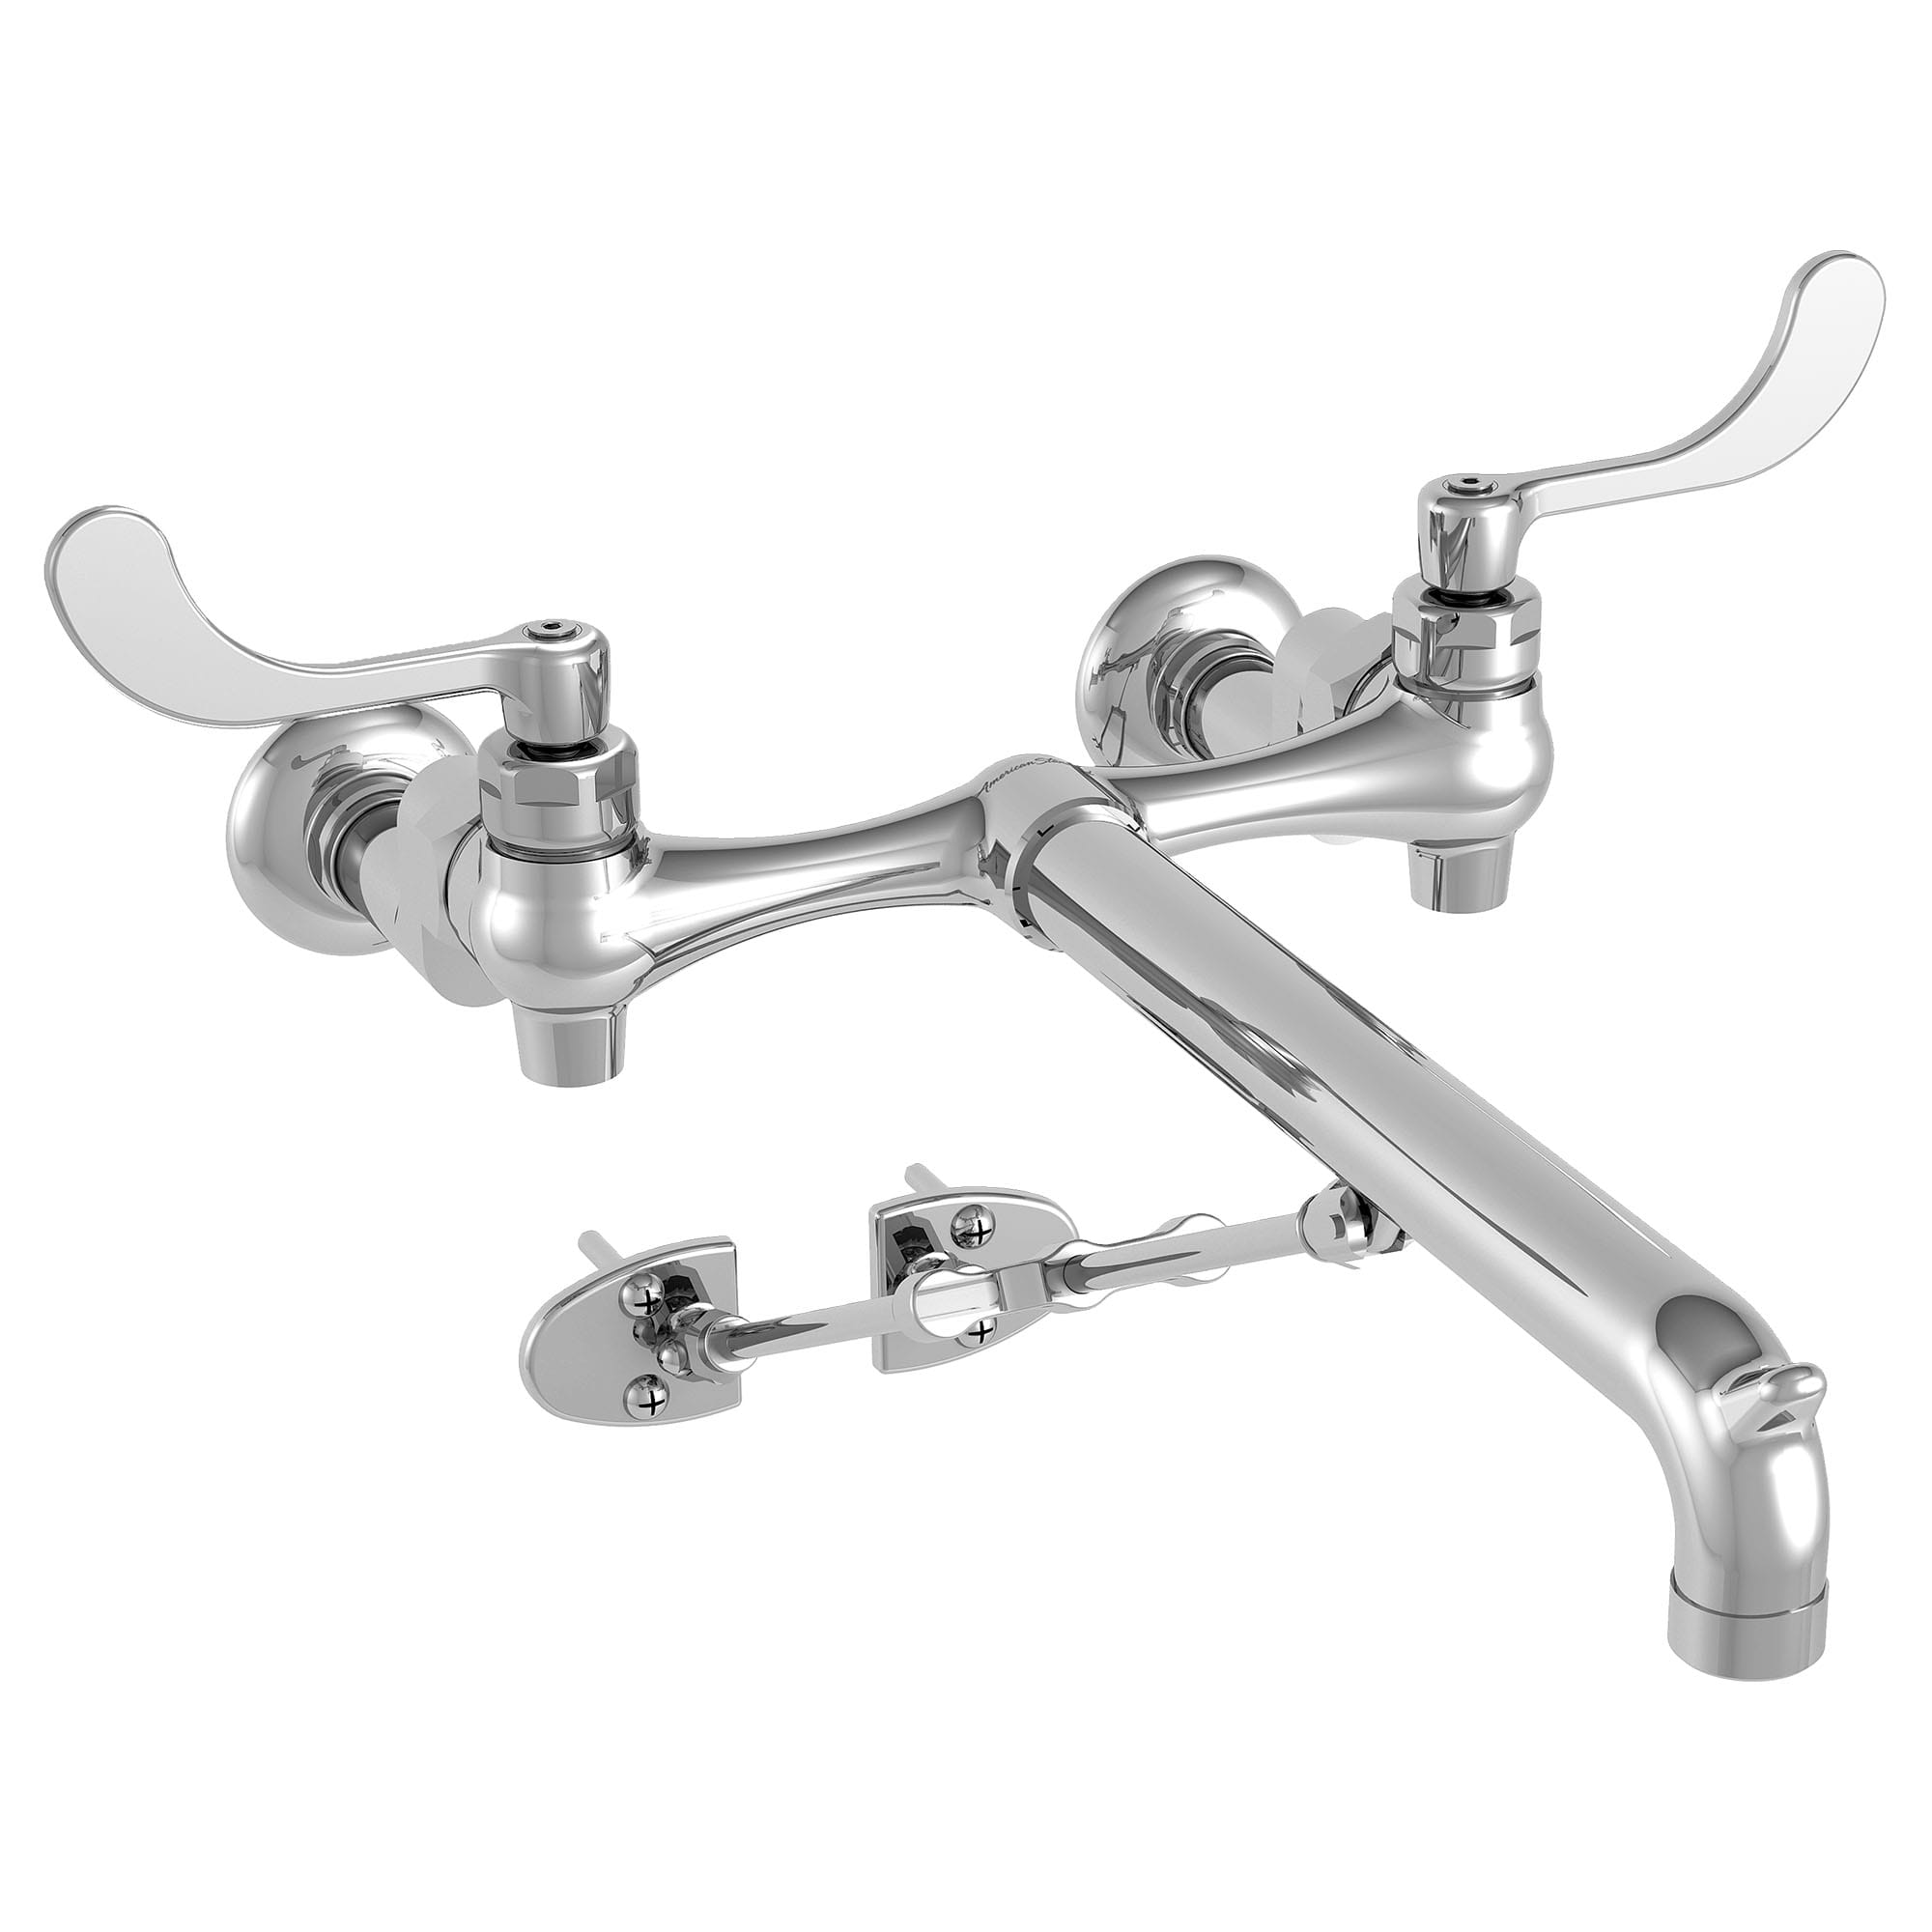 Bottom Brace Wall-Mount Service Sink Faucet With 12-Inch Spout and Offset Shanks